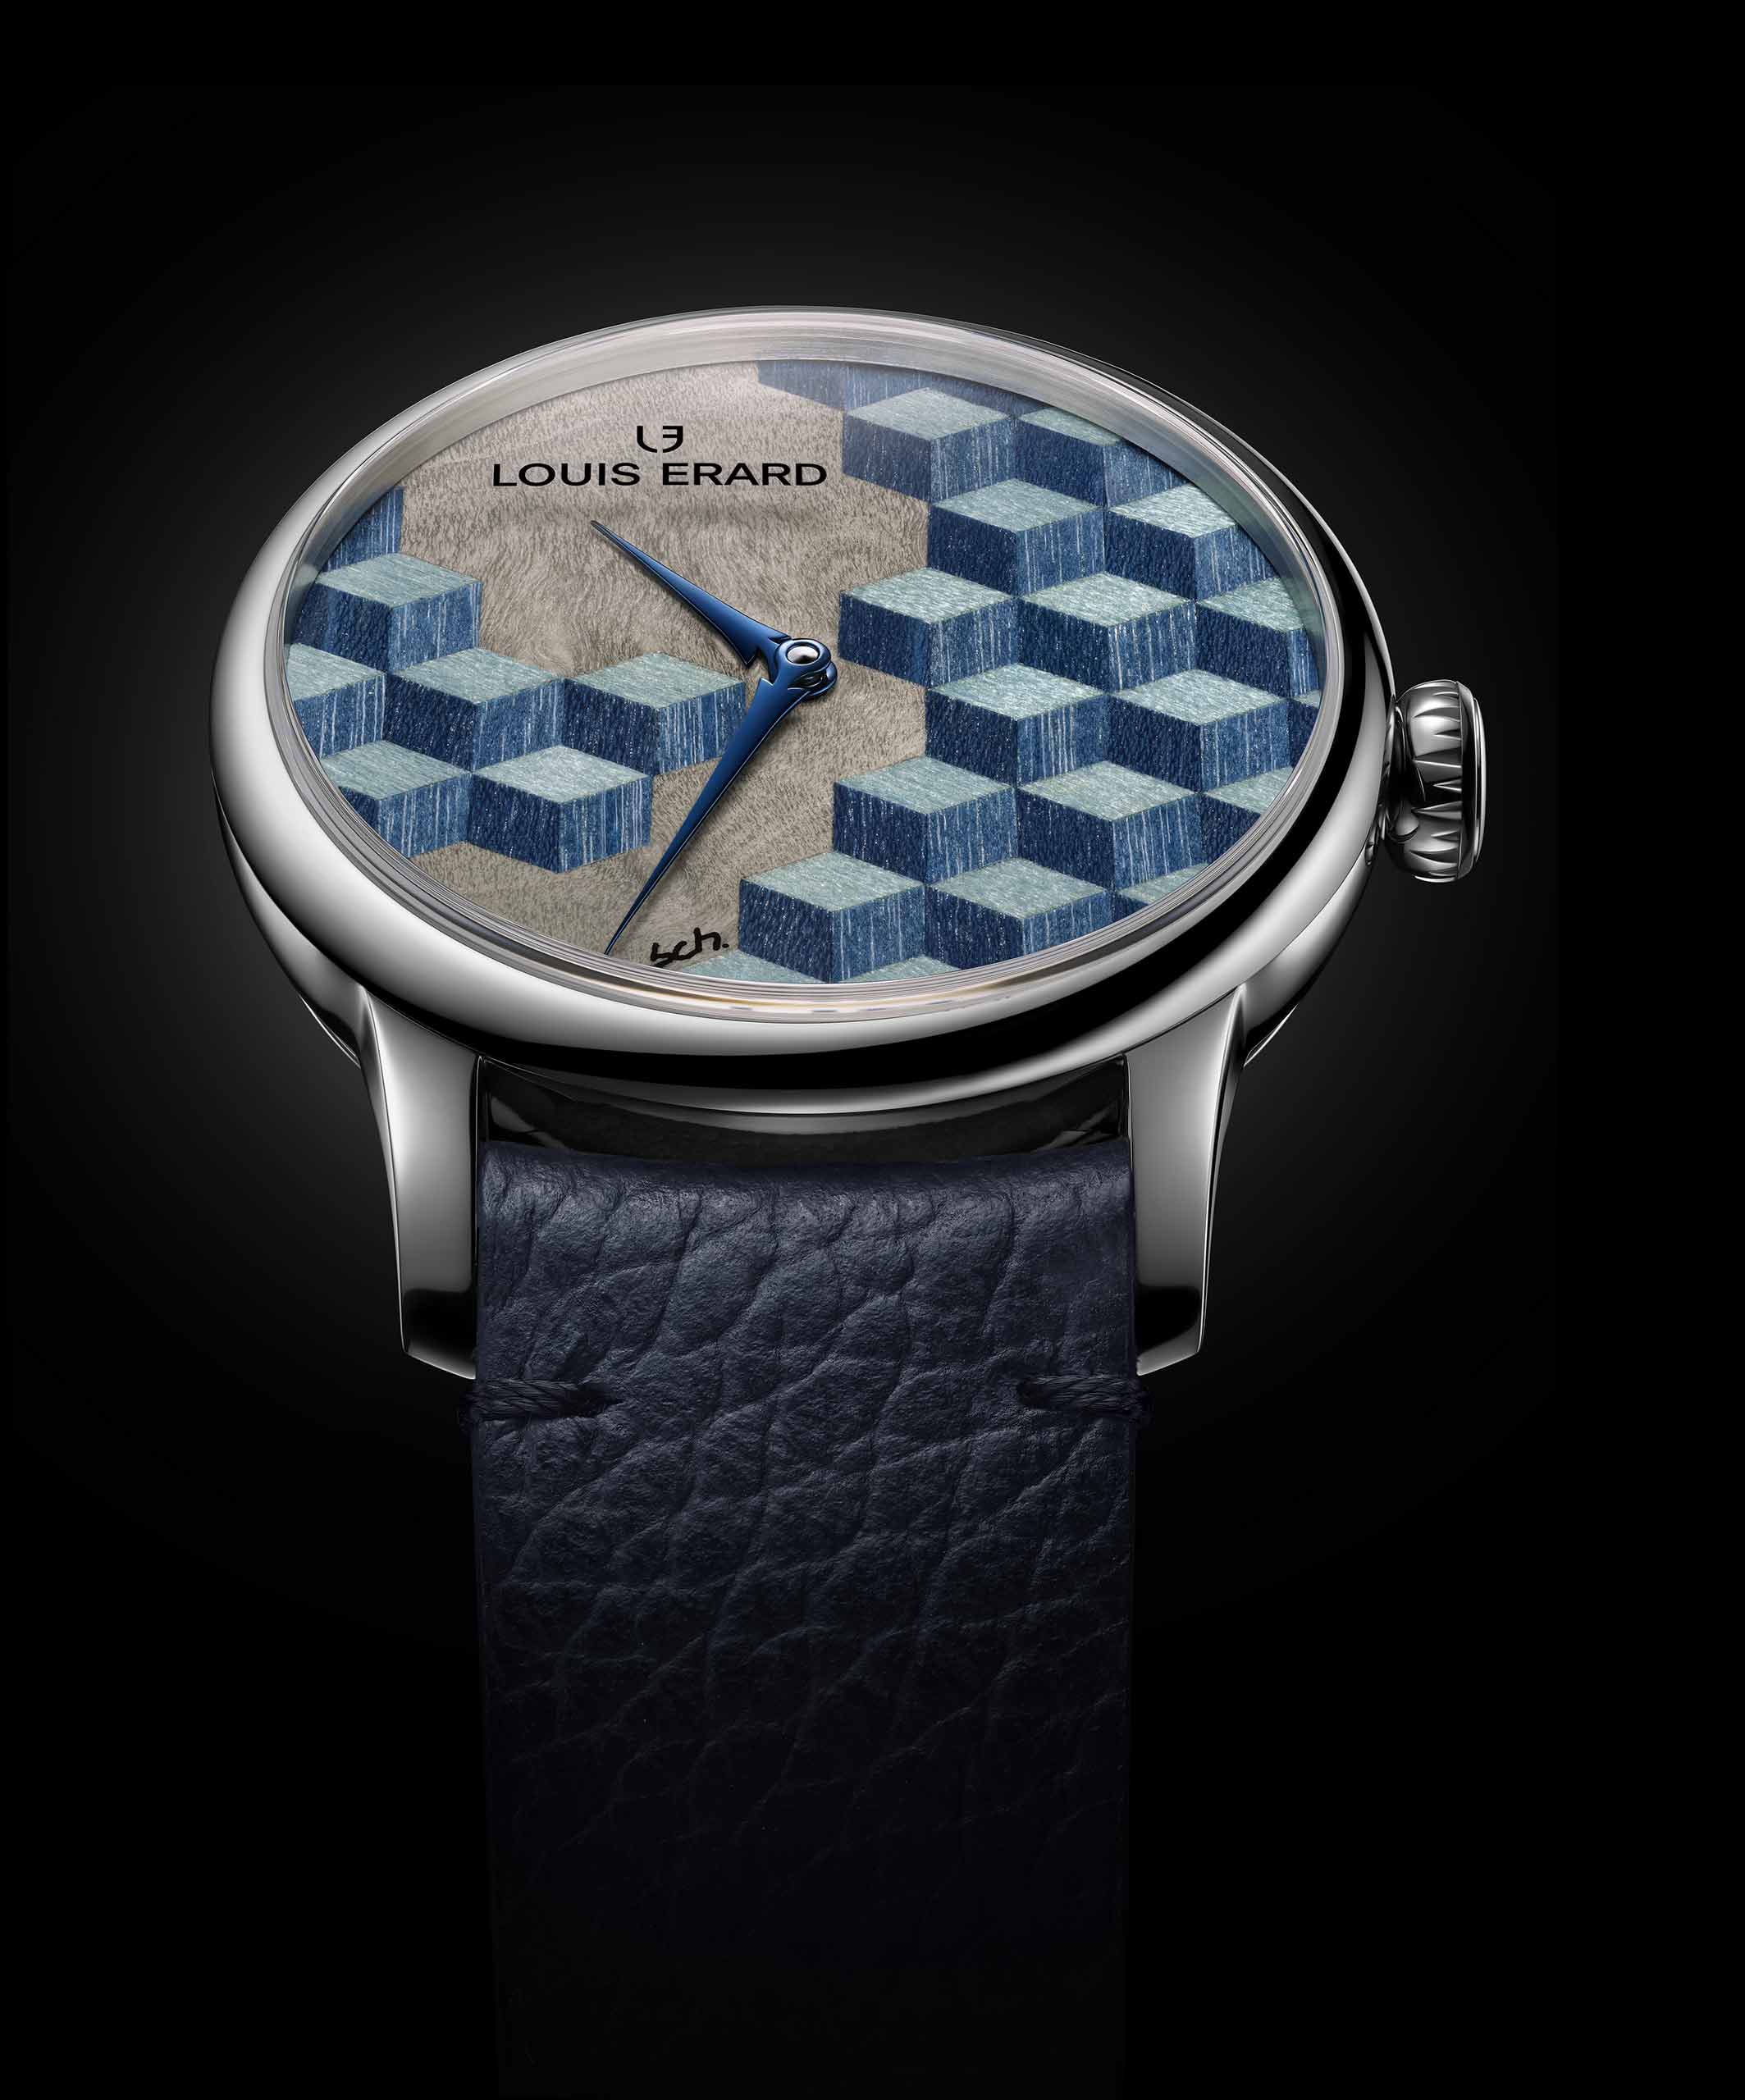 Introducing – Louis Erard Brings Three New Colours To The